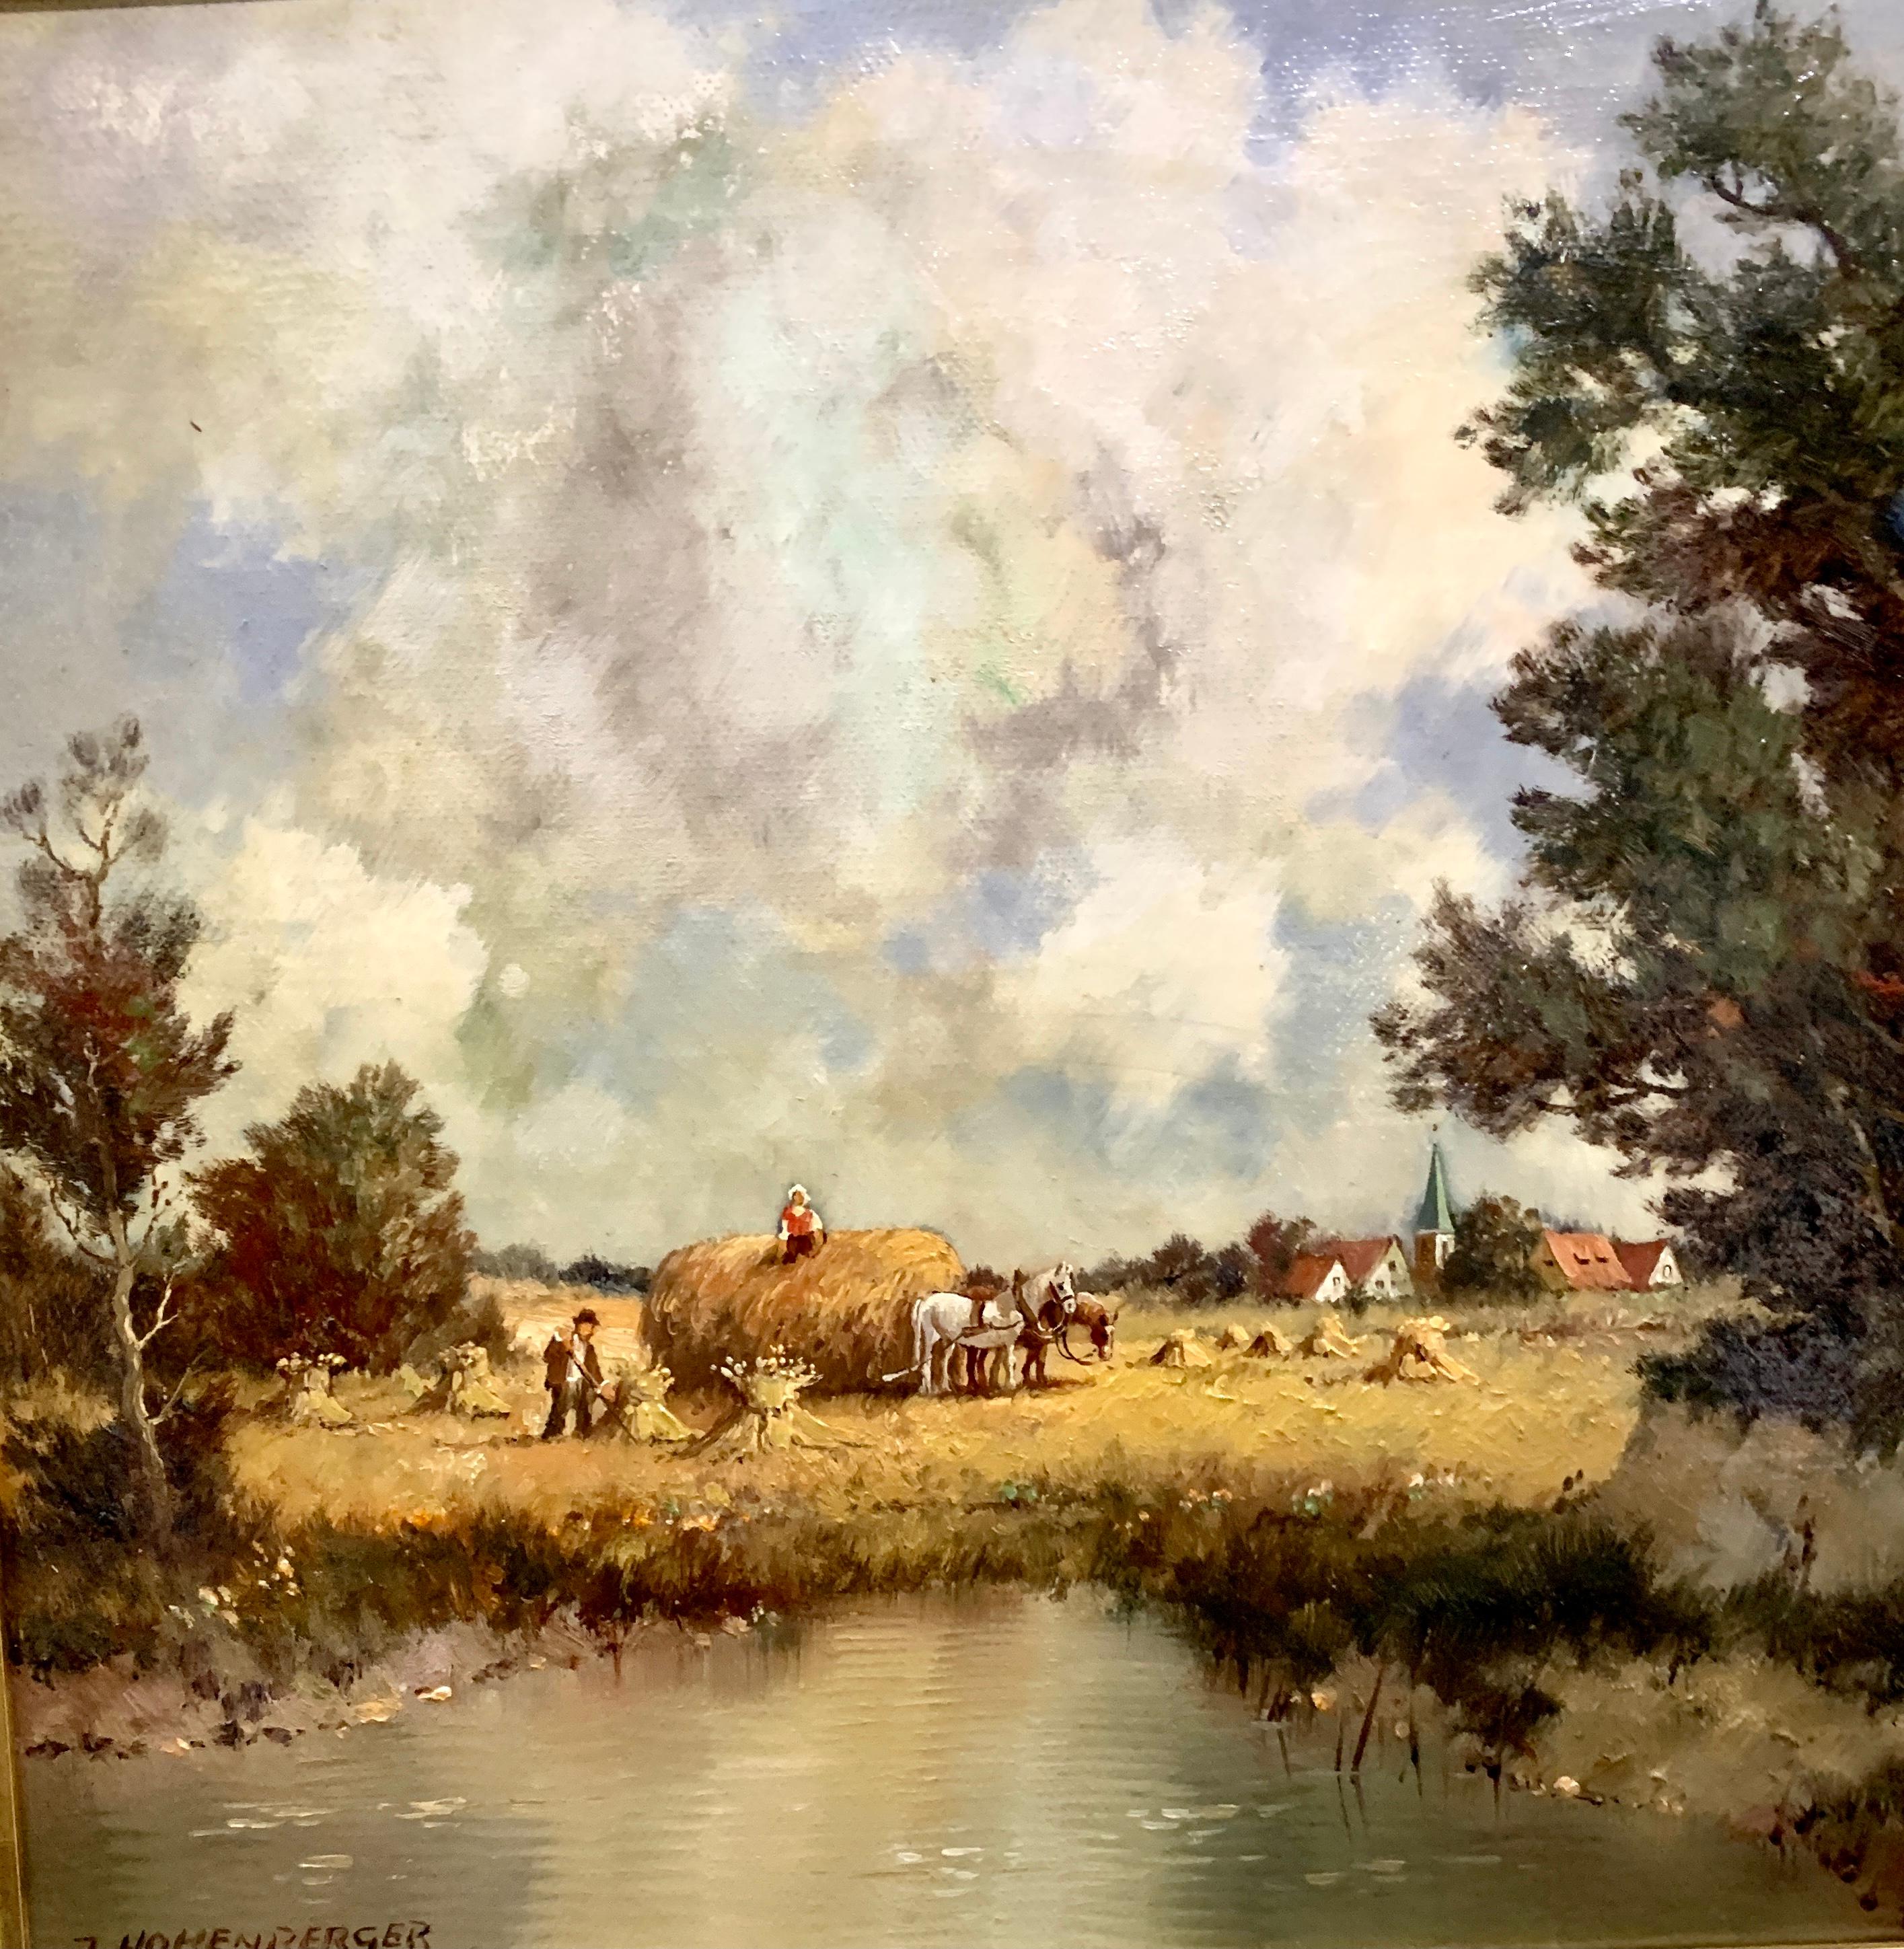 20th century Harvest River landscape with horses, farmers, a church and village. - Painting by J.Hohenberger